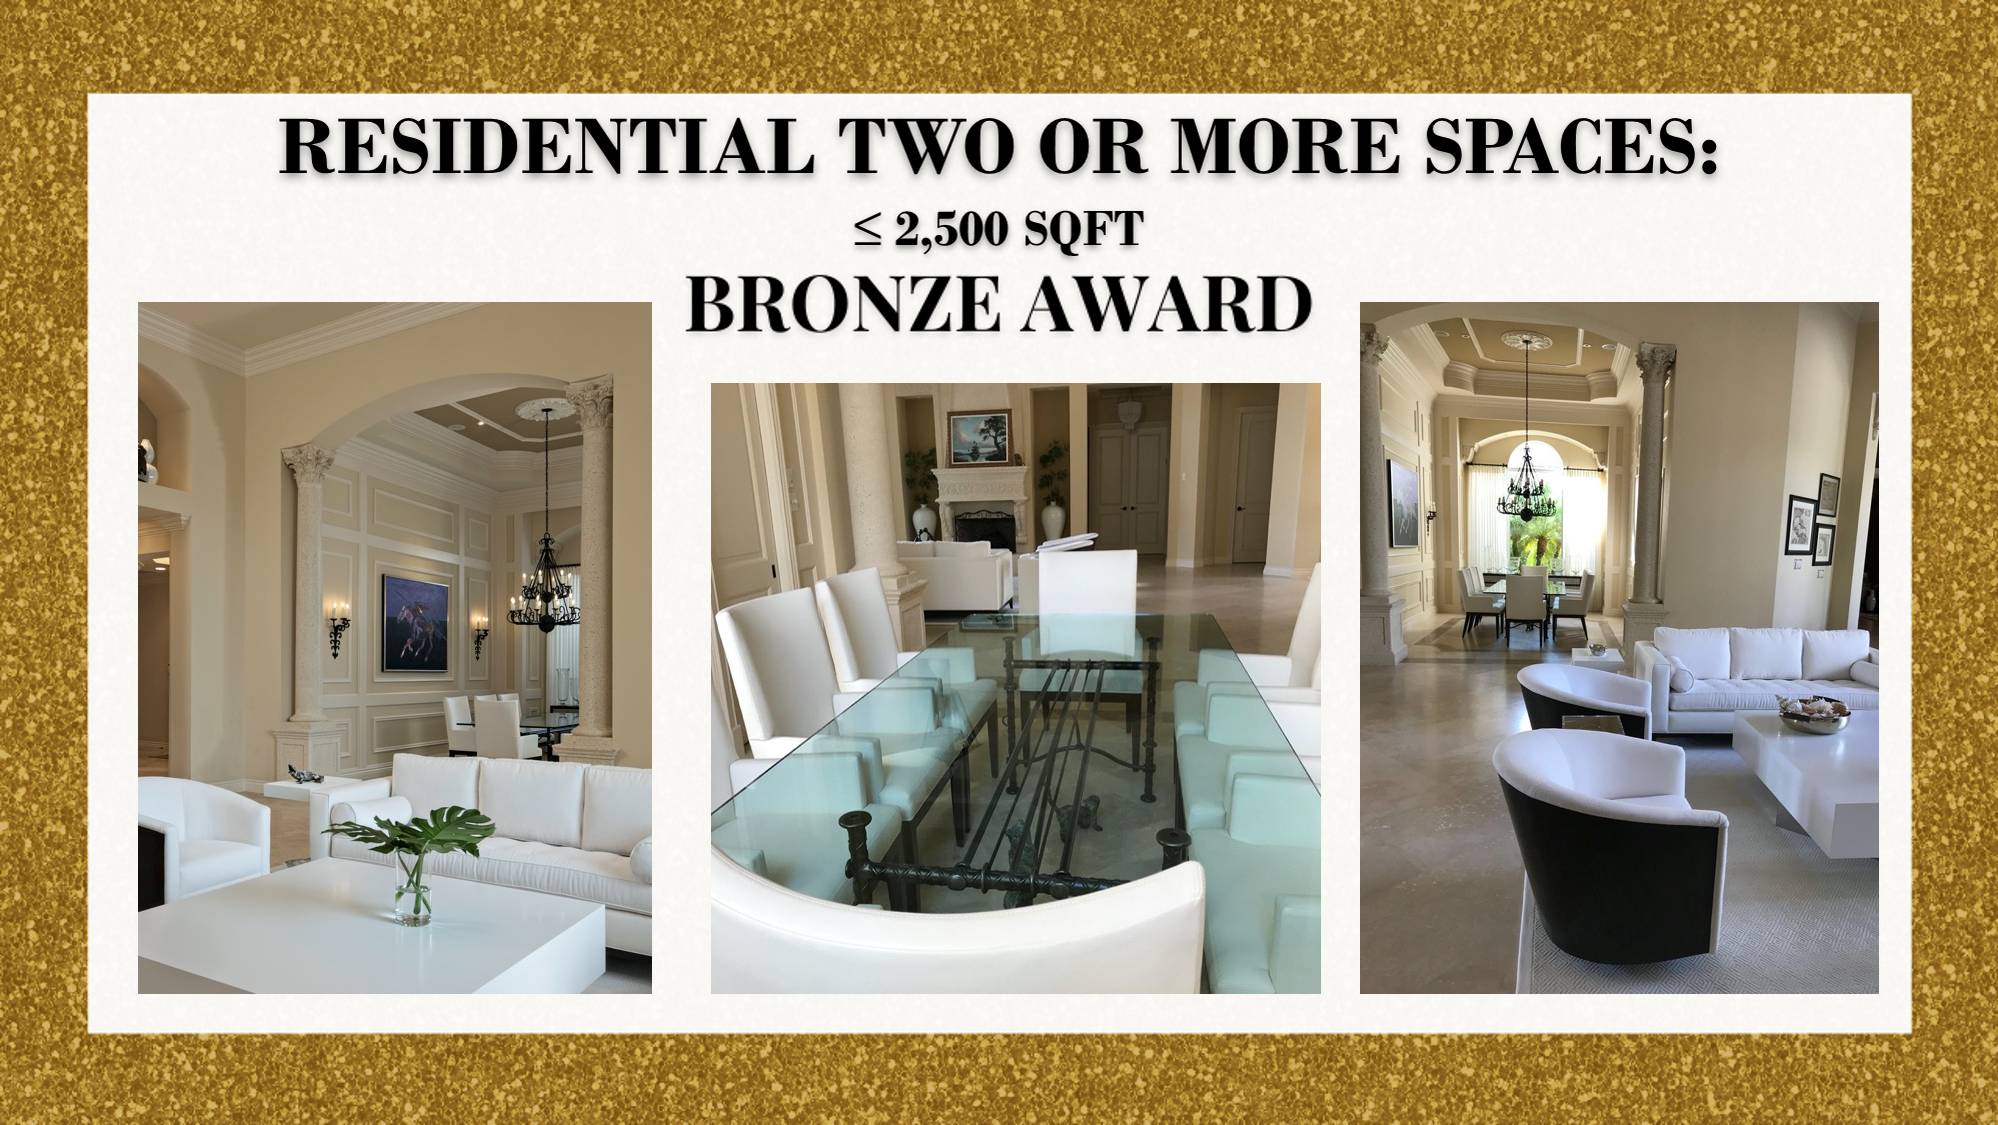 Bronze Award Residential Two or More Spaces < 2,500 Square Foot